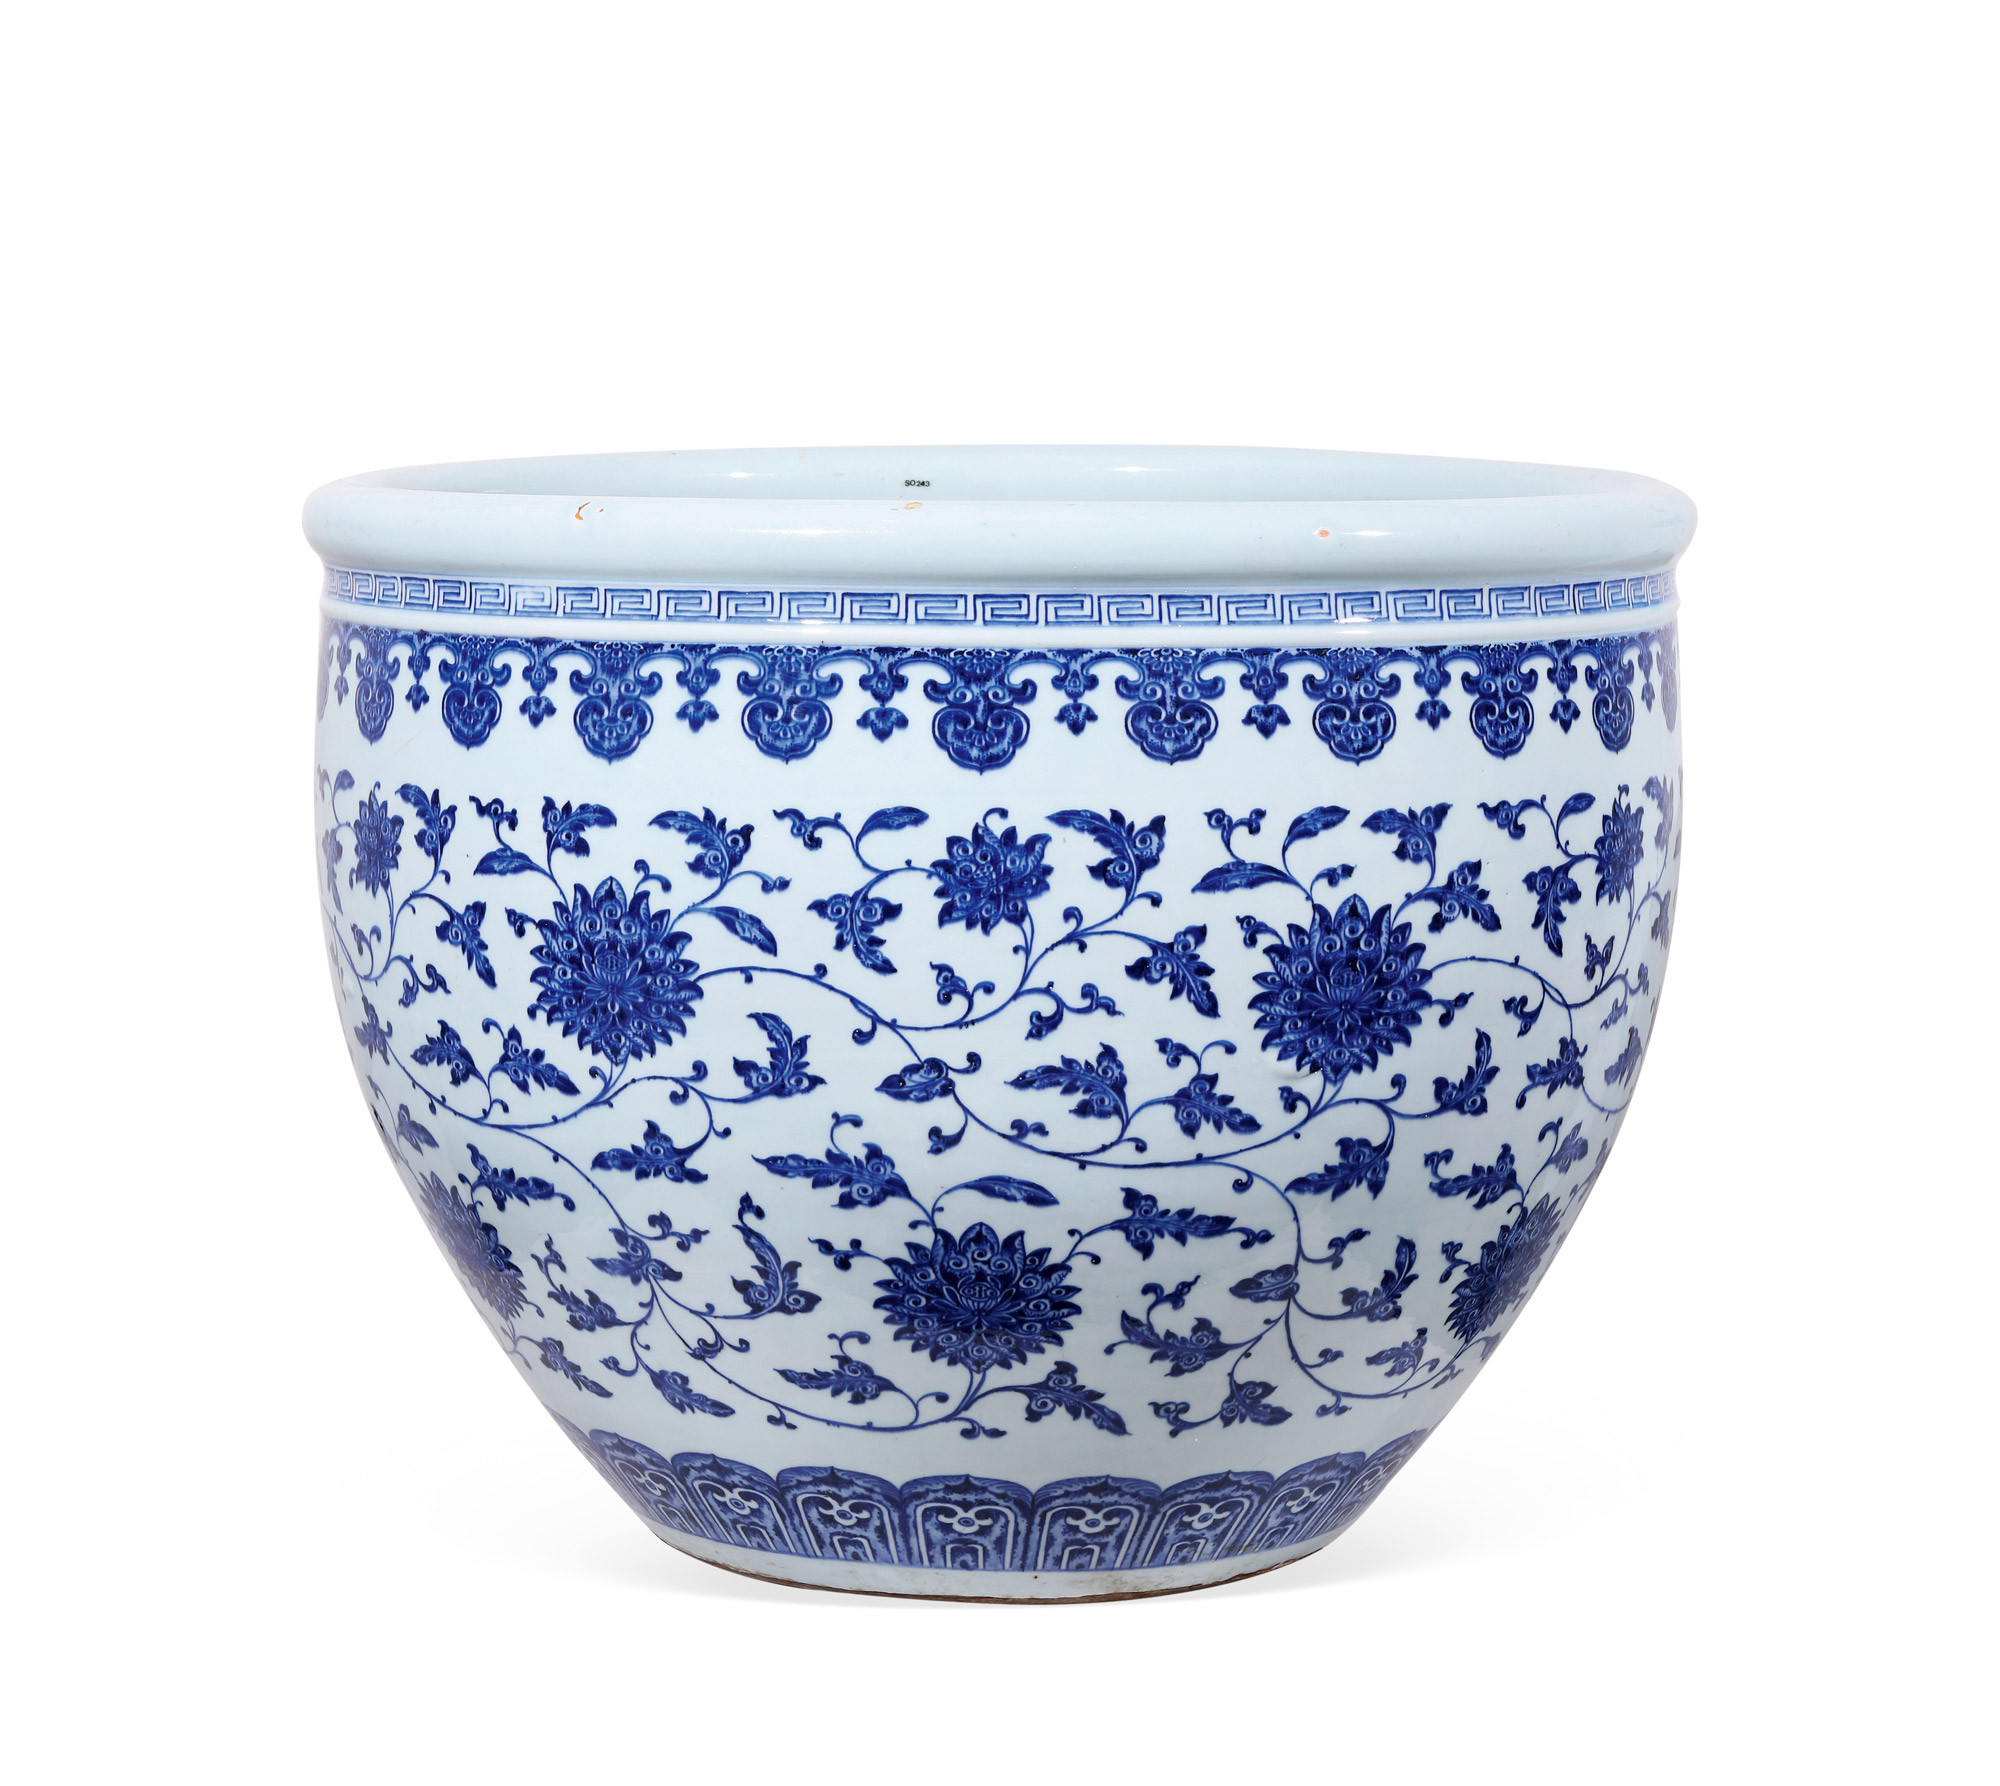 A BLUE AND WHITE‘FLORAL’ URN